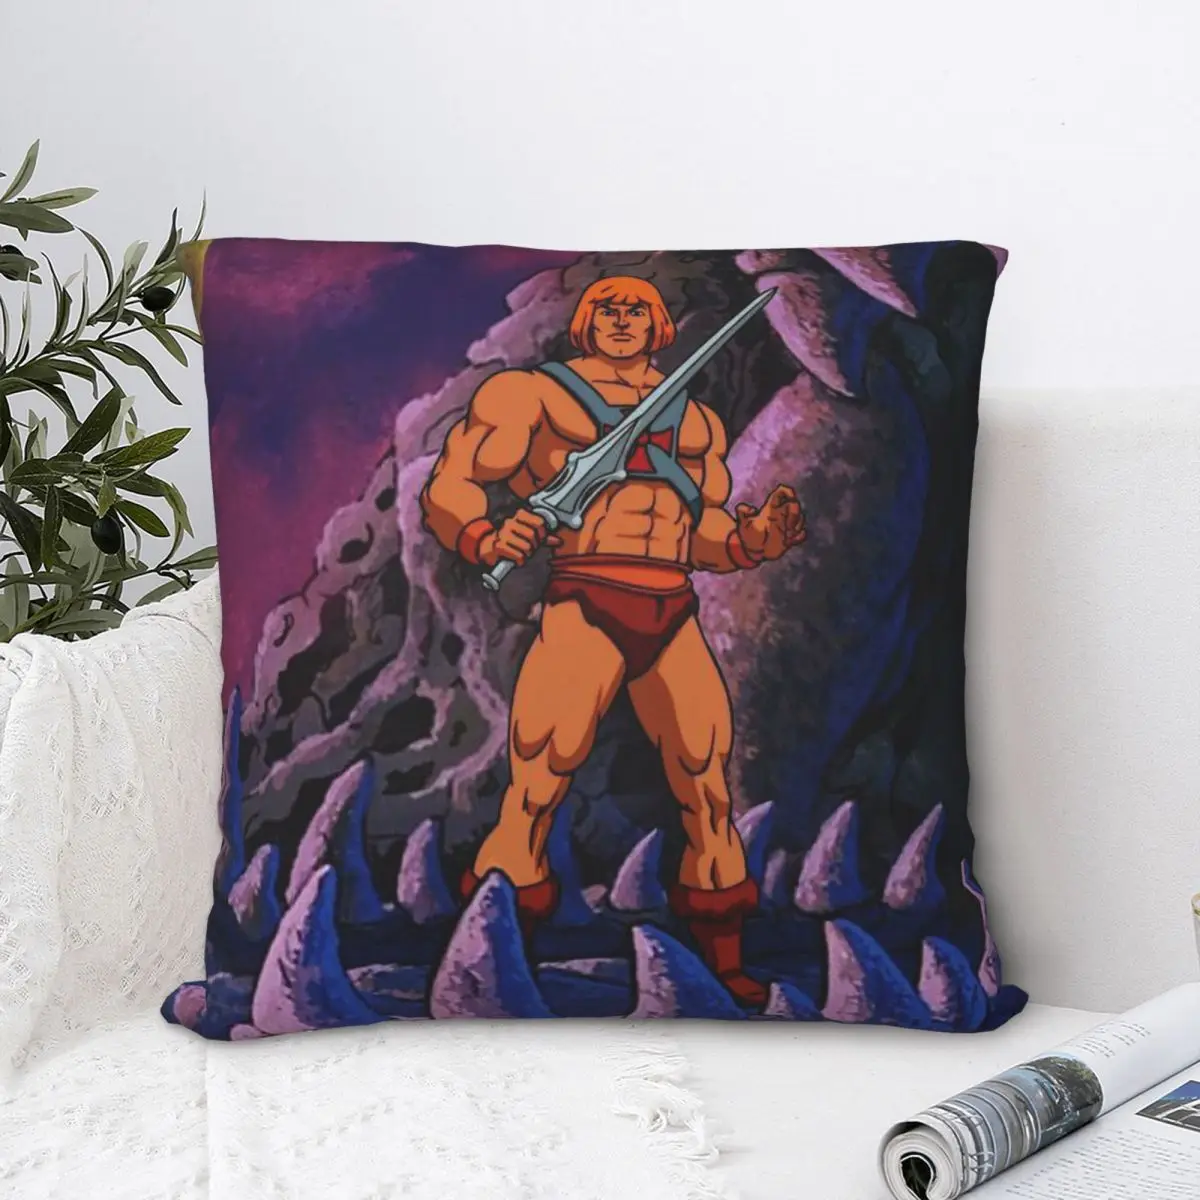 

Stand Hug Pillowcase He-Man and the Masters of the Universe Backpack Cushion Garden DIY Printed Office Coussin Covers Decorative